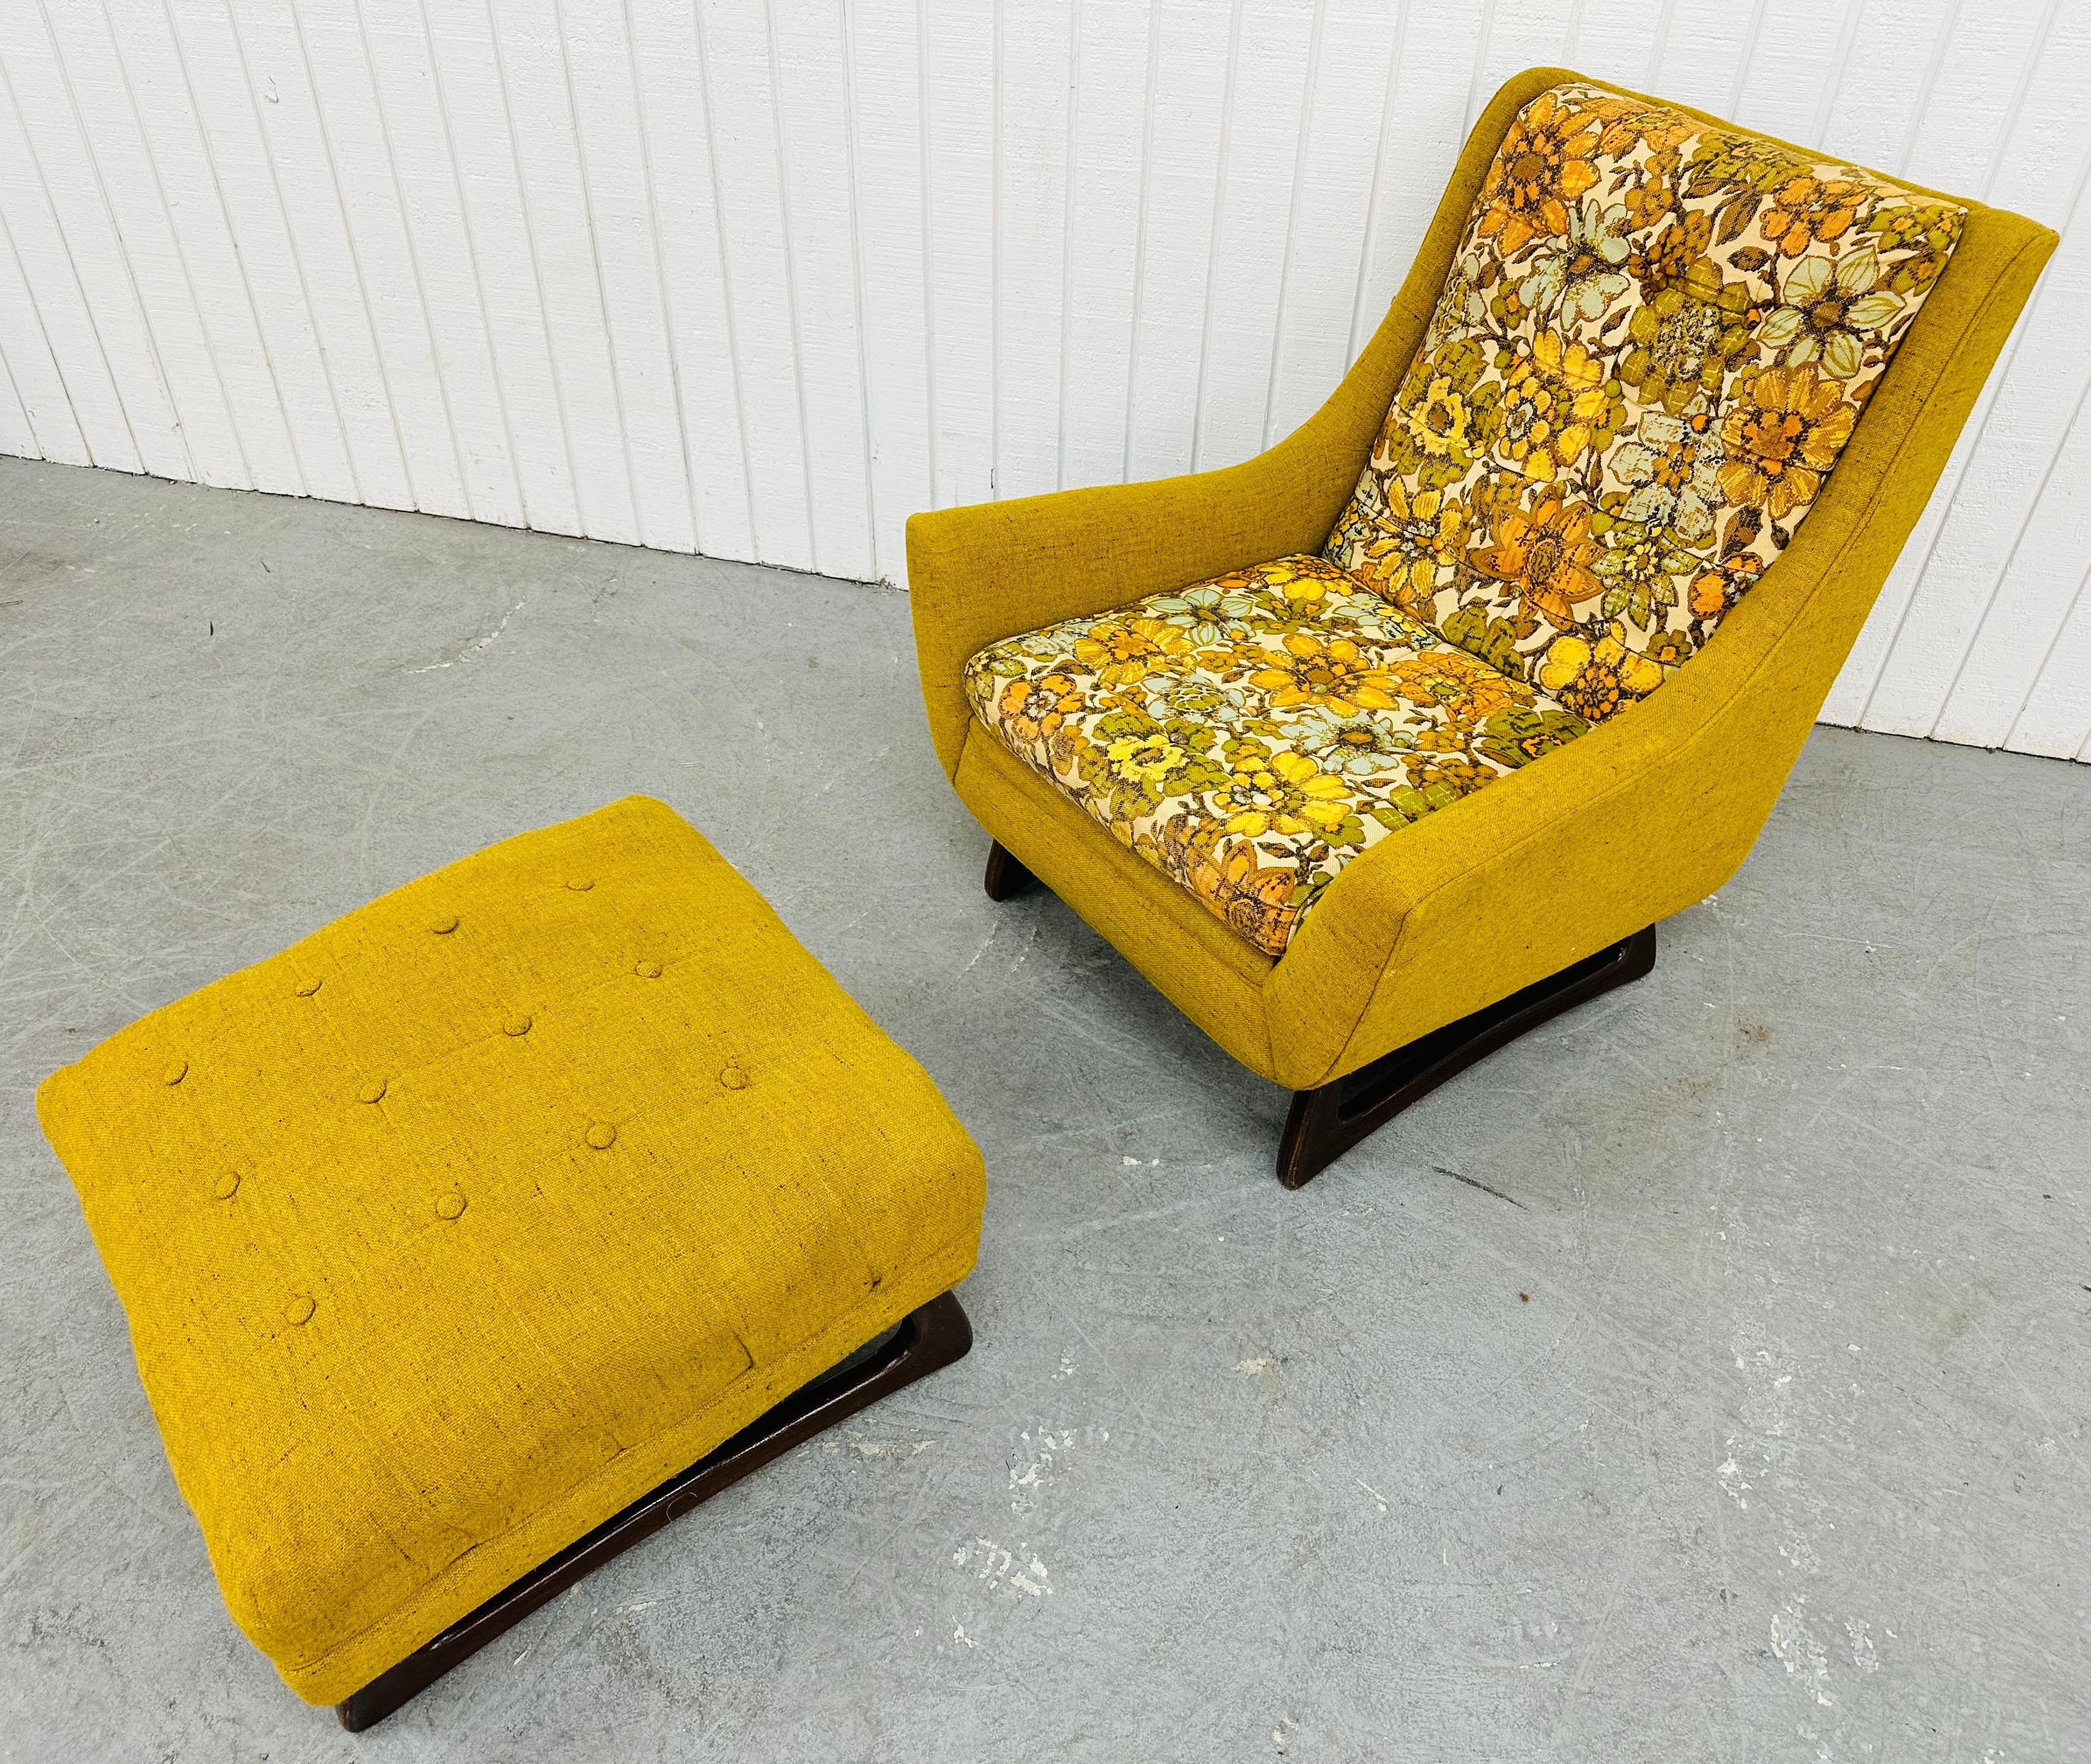 This listing is for a Mid-Century Modern Adrian Pearsall Style Lounge Chair. Featuring an Adrian Pearsall design, original yellow/floral upholstery, and sculptural walnut legs. This is an exceptional combinationu of quality and design in the style